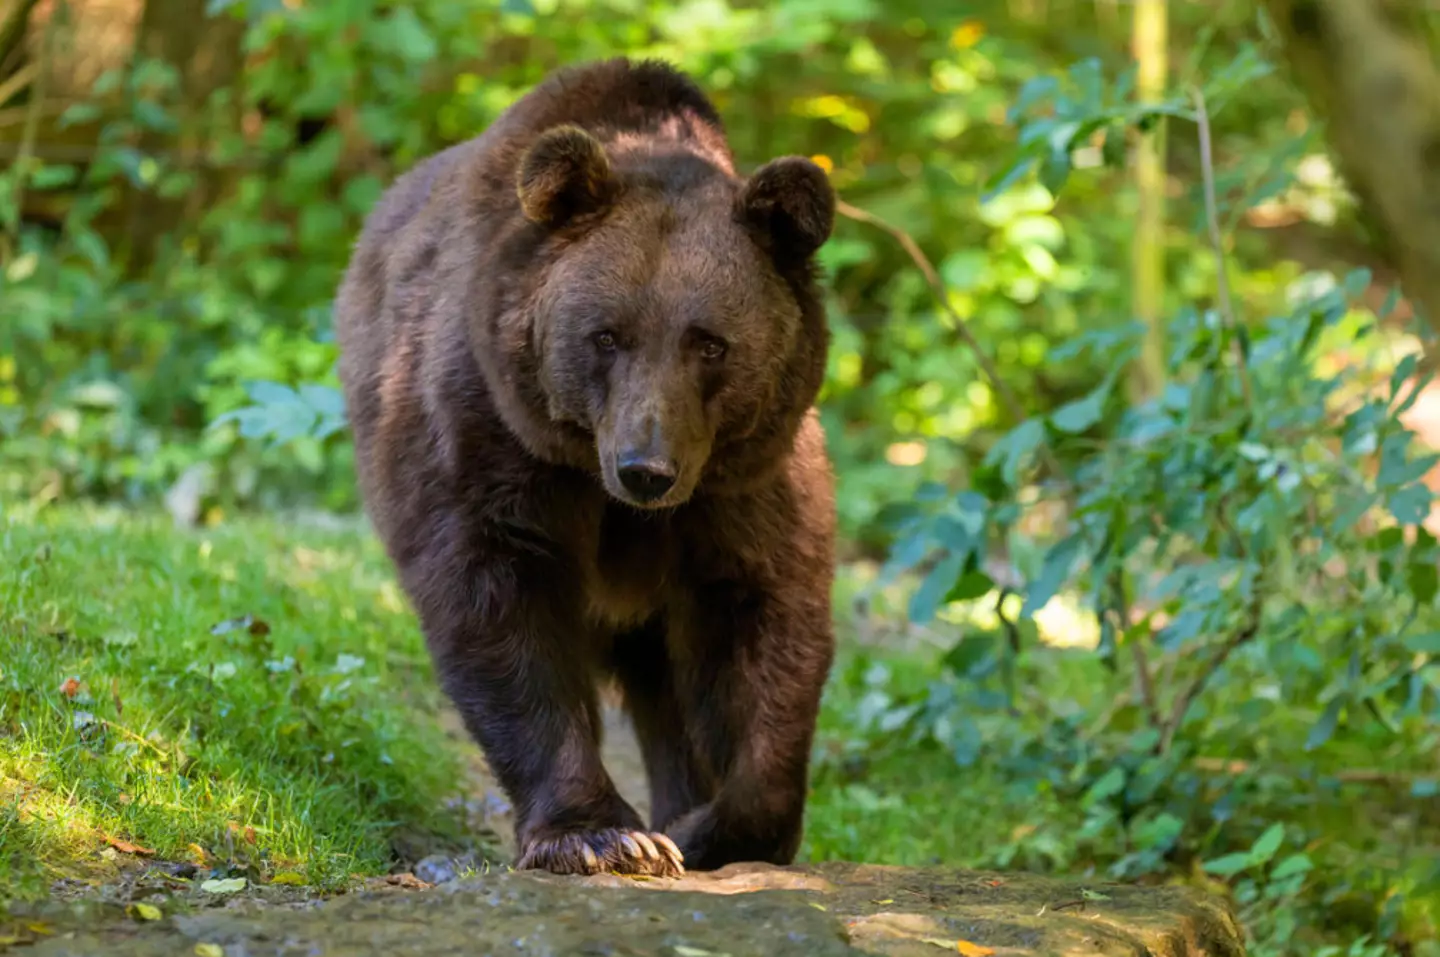 The court said it needed more information before deciding on the bear's fate.